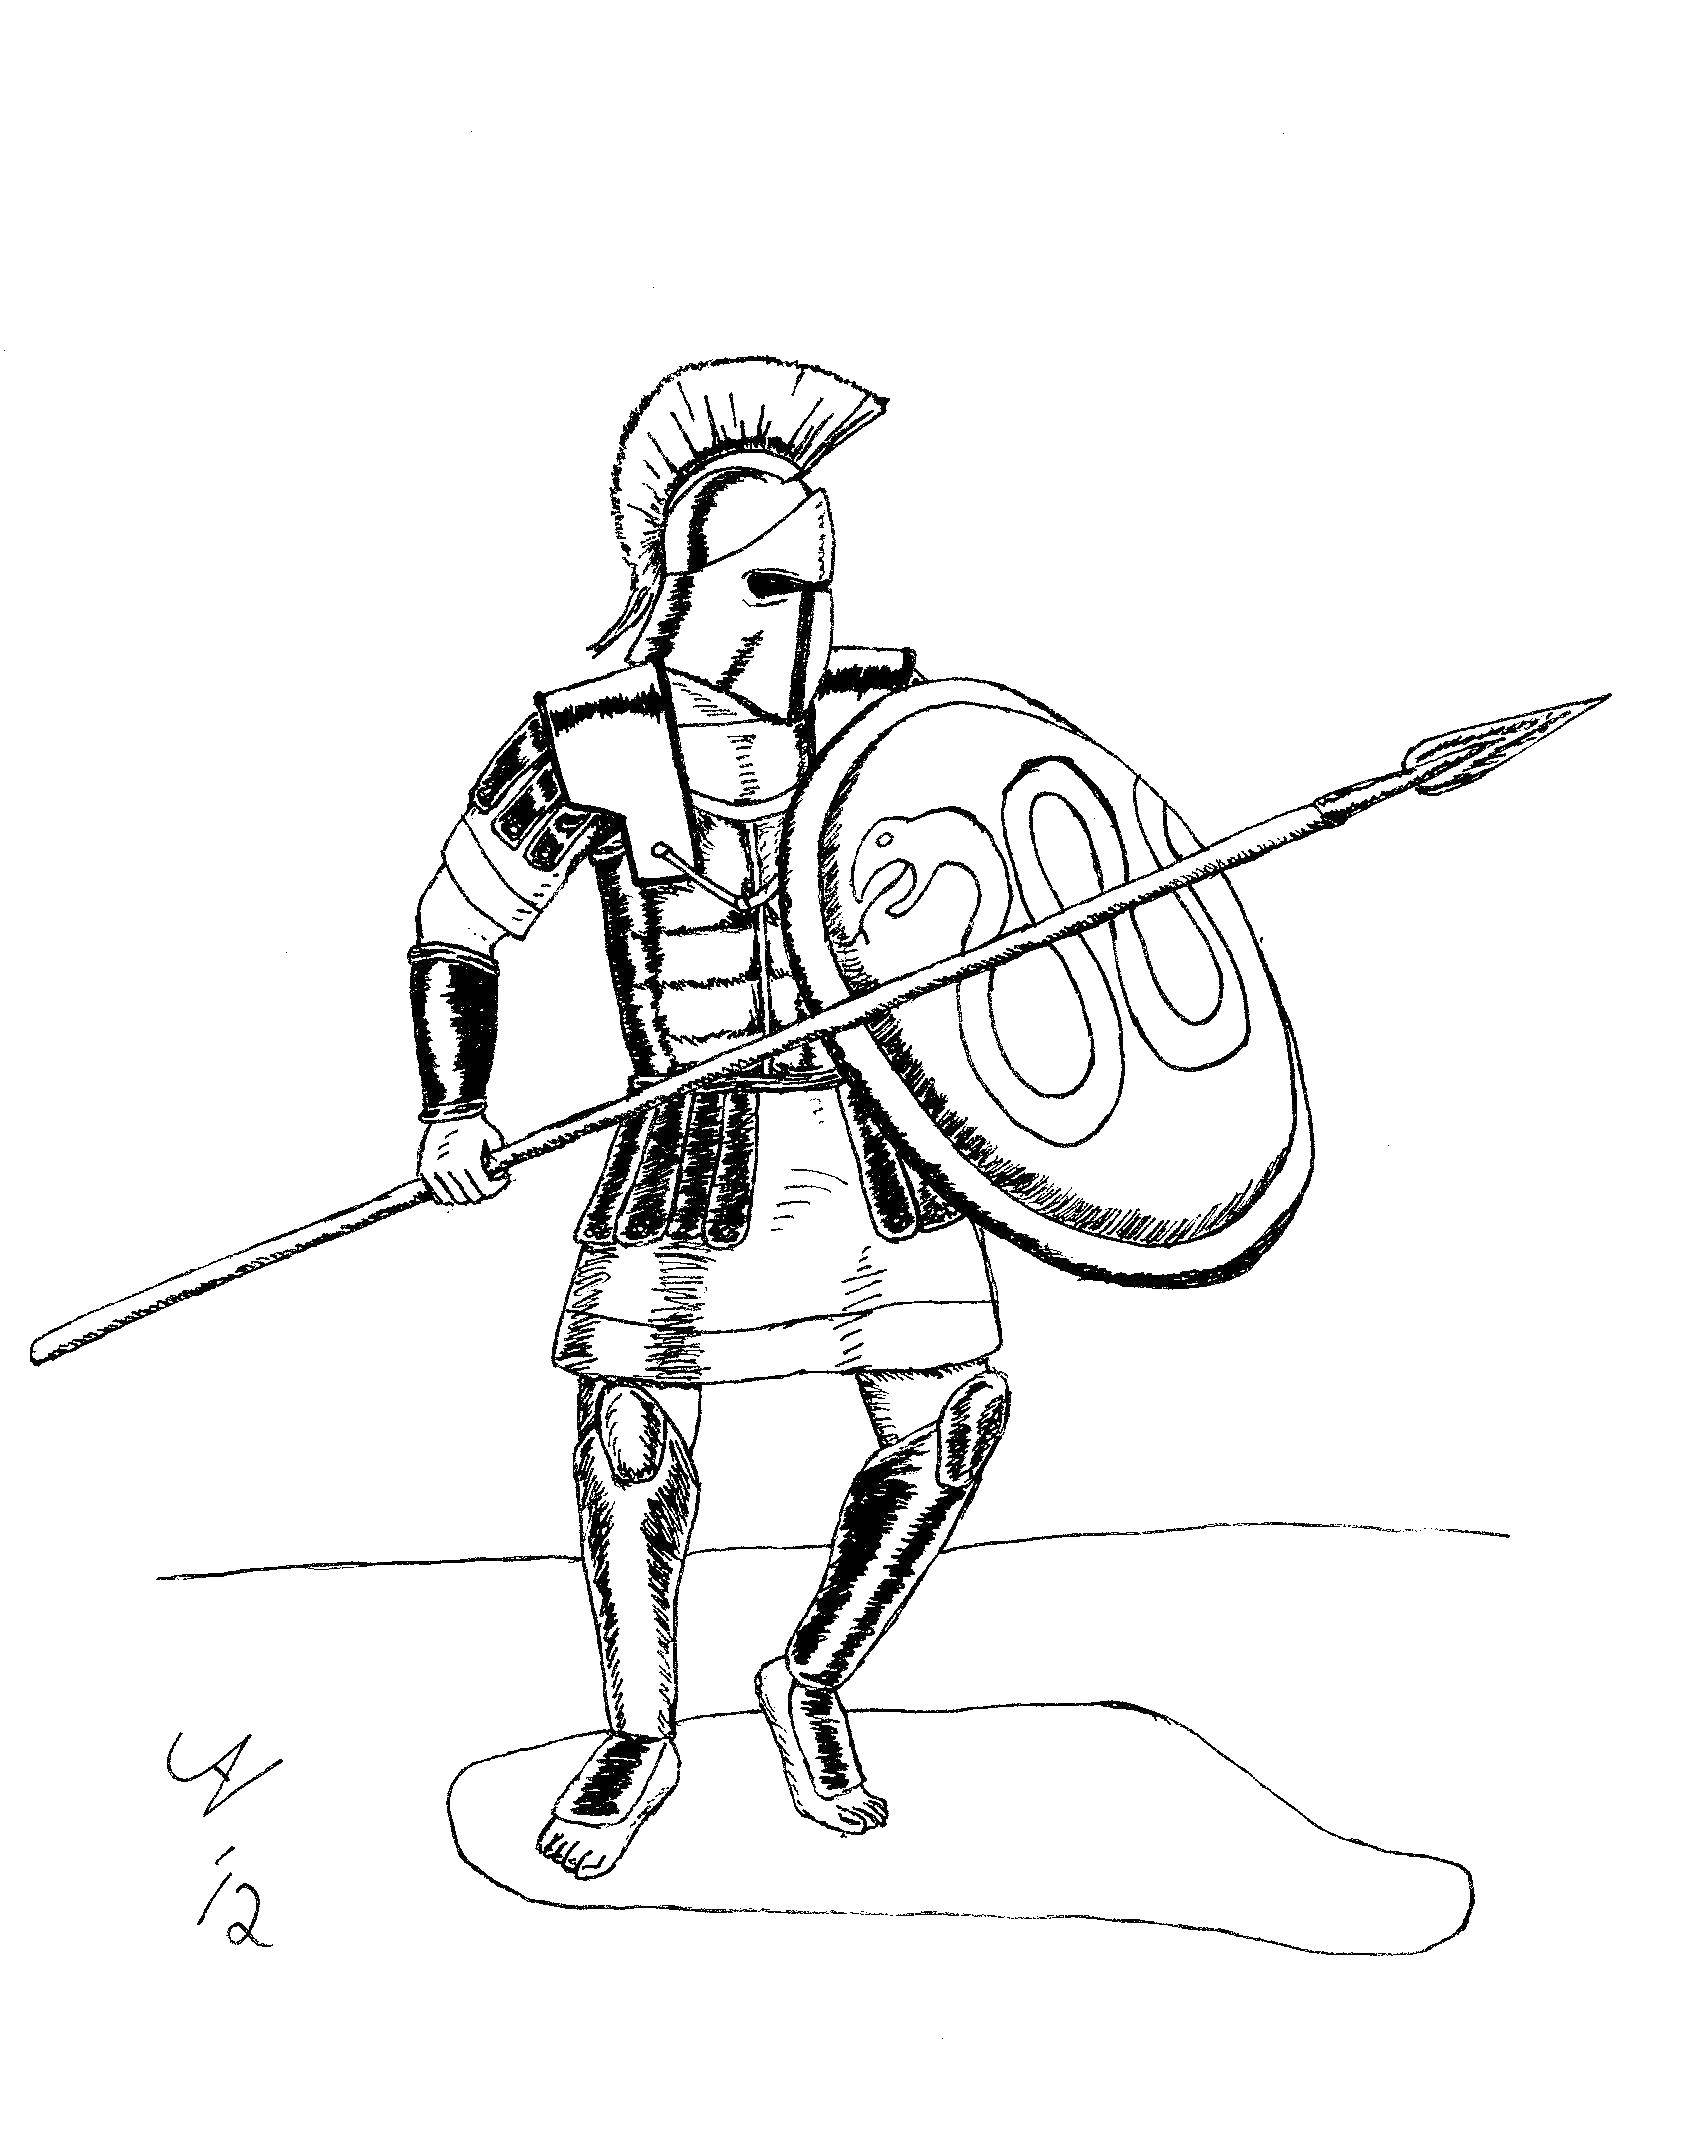 Coloring Gladiator ready for battle. Category People. Tags:  gladiators, ancient Rome.